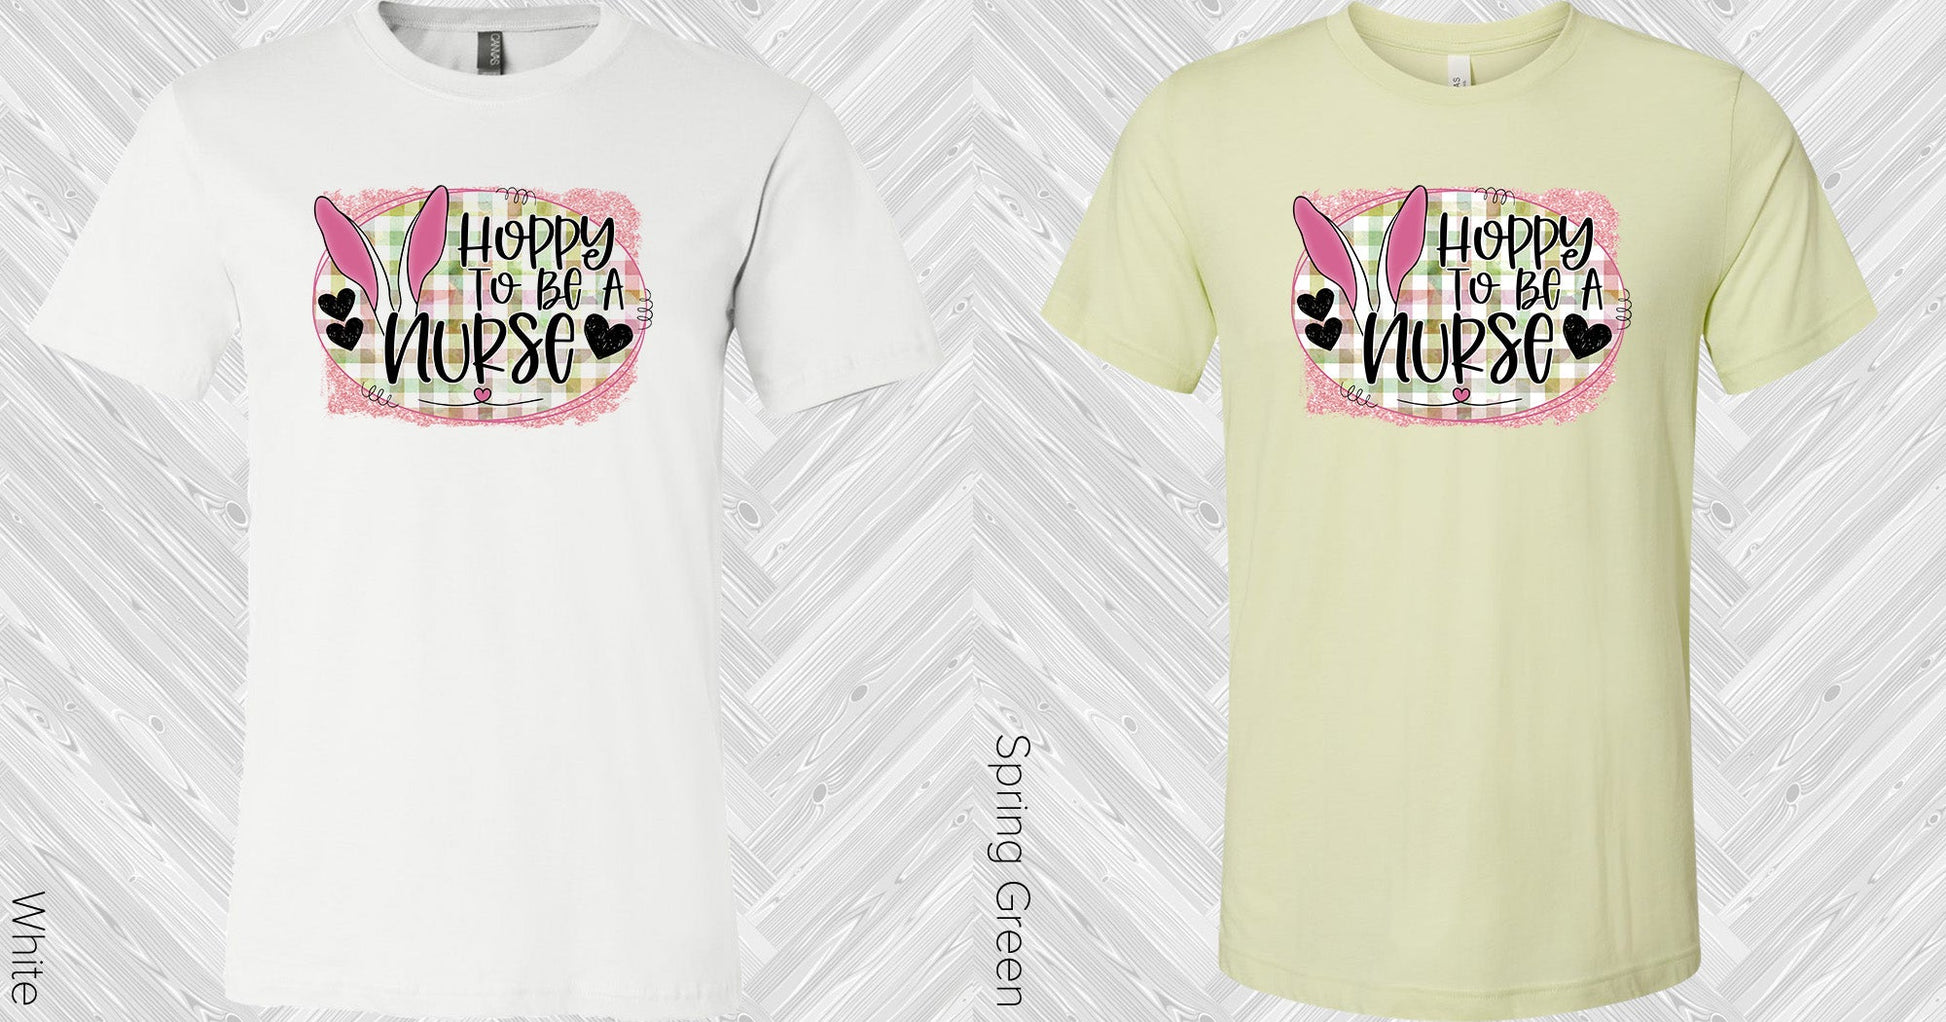 Hoppy To Be A Nurse Graphic Tee Graphic Tee